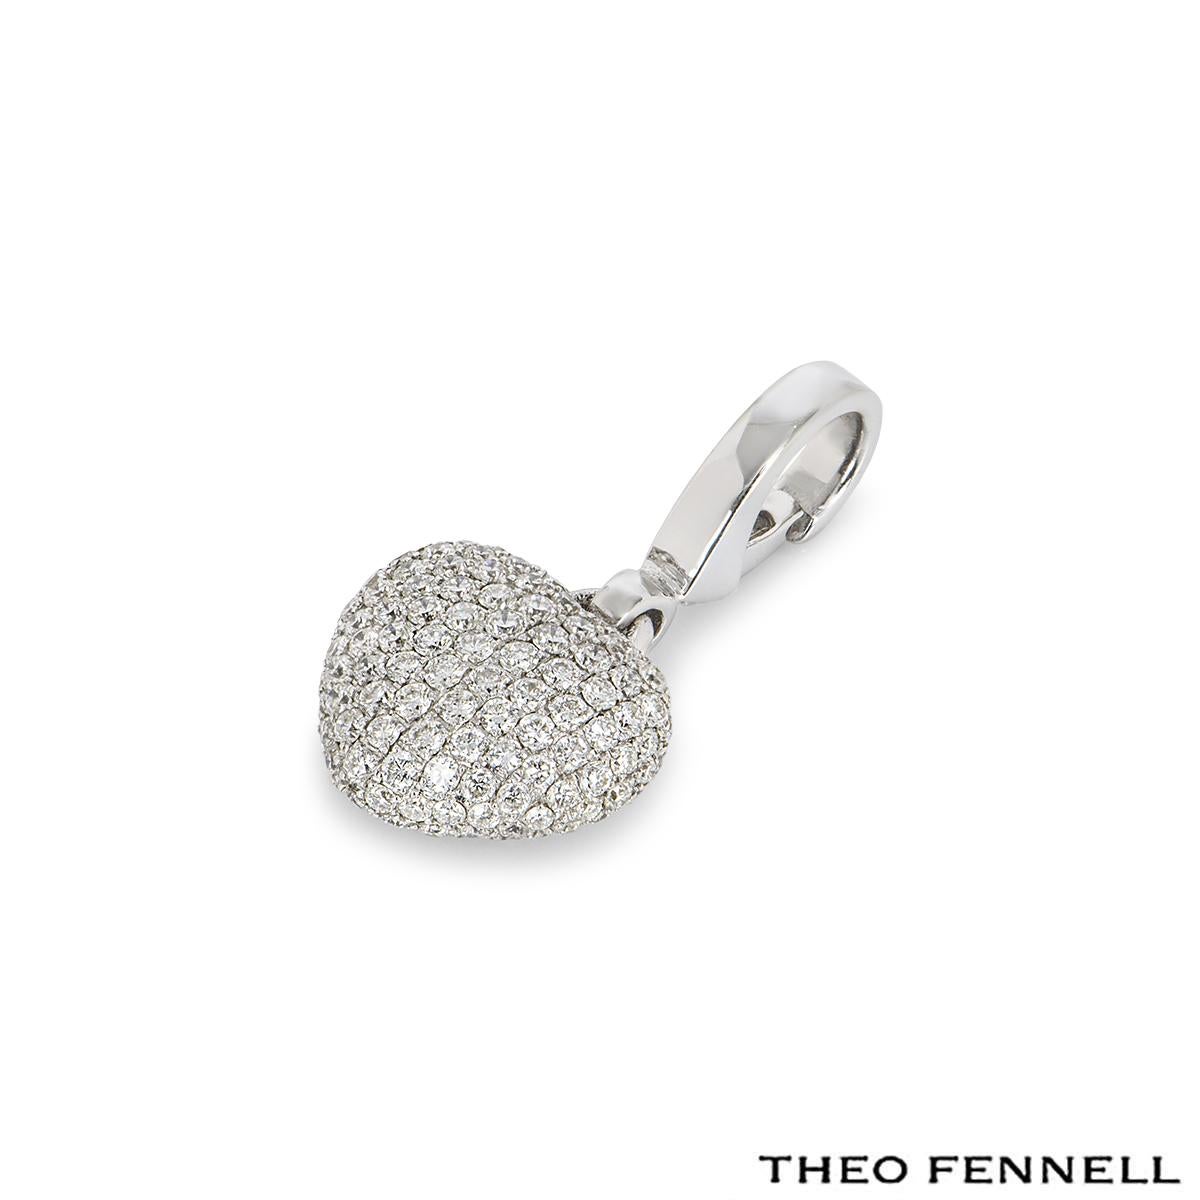 theo fennell heart pendant